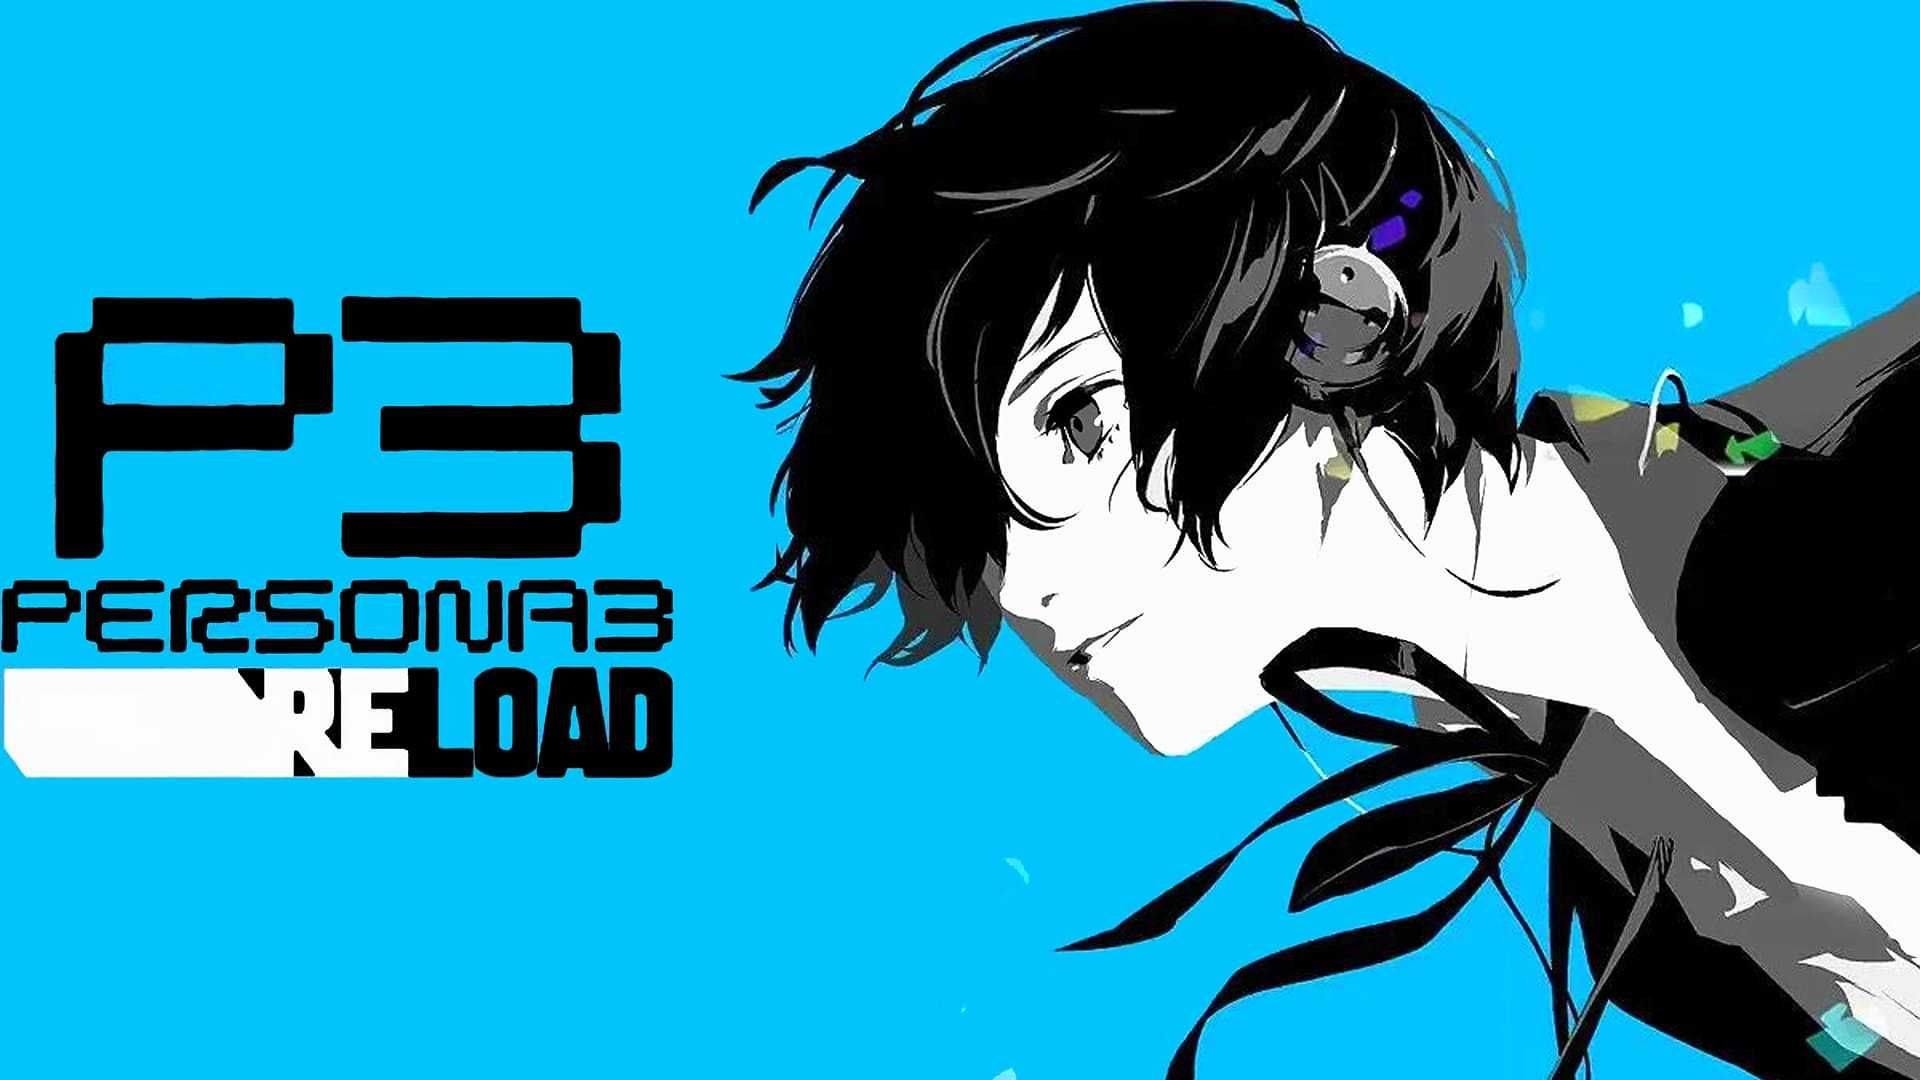 Persona 3 Reload pre-order bonuses: All editions & prices - Charlie INTEL